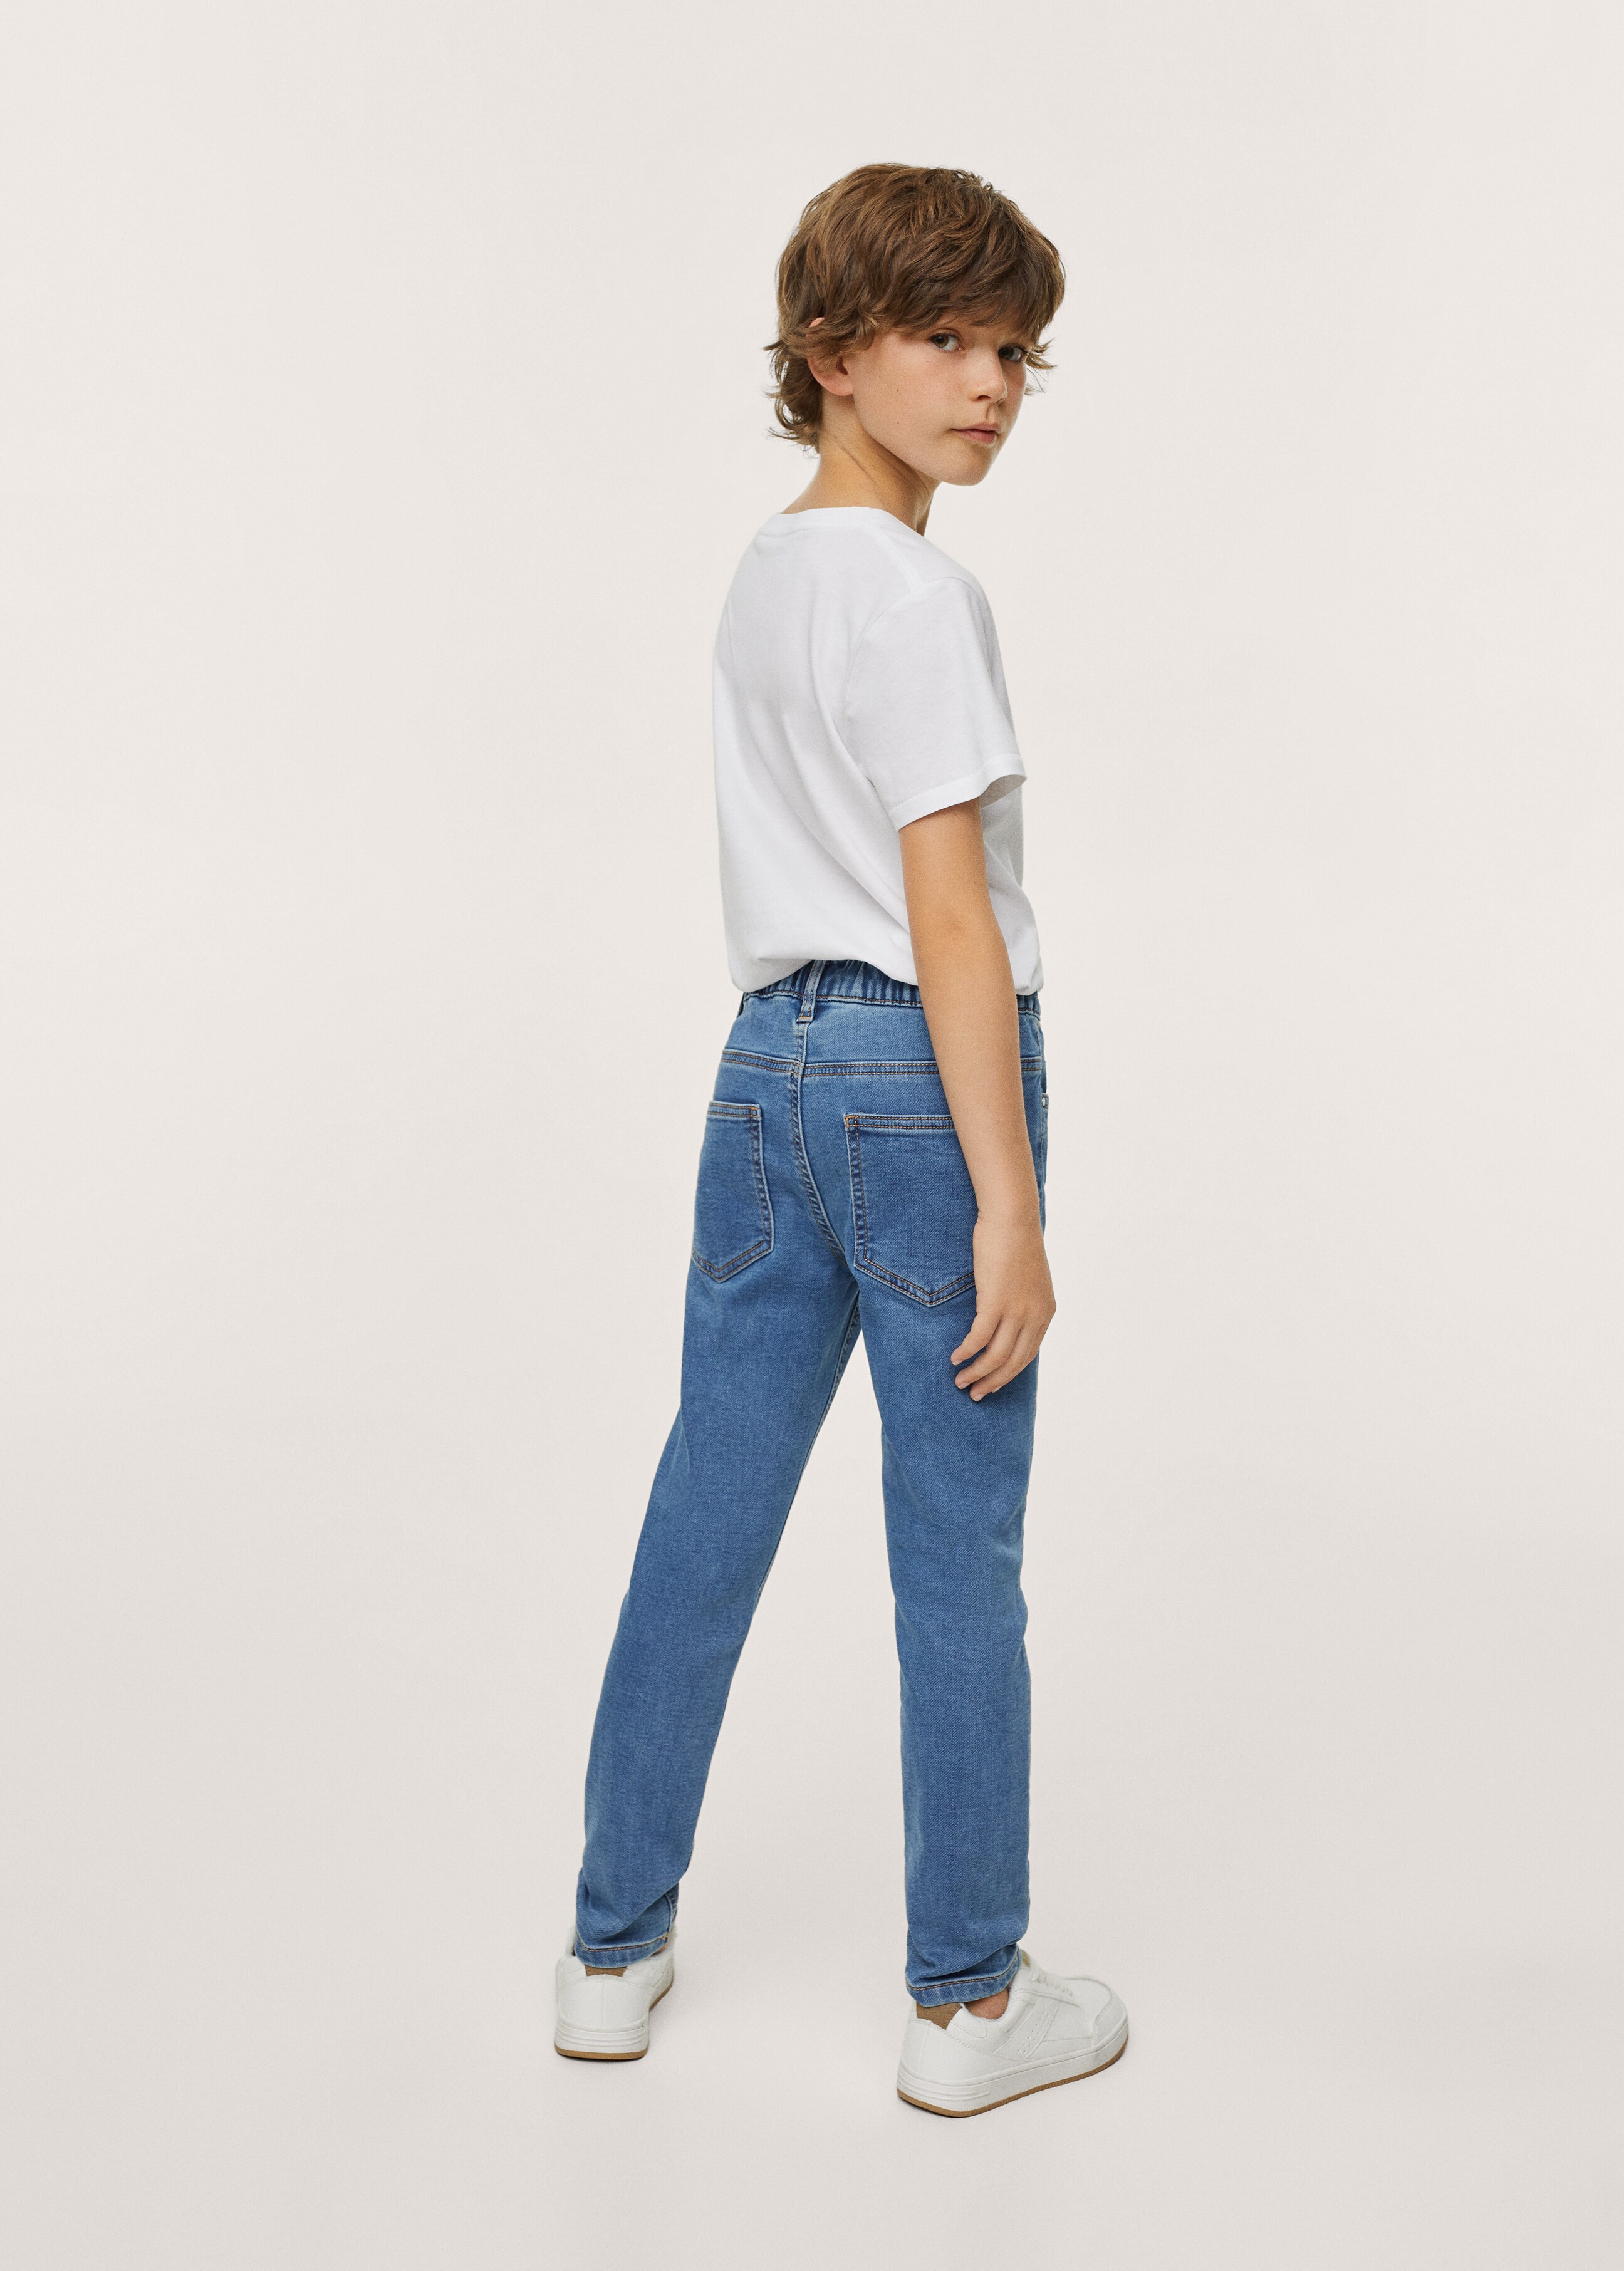 Lace drawstring waist jeans - Reverse of the article